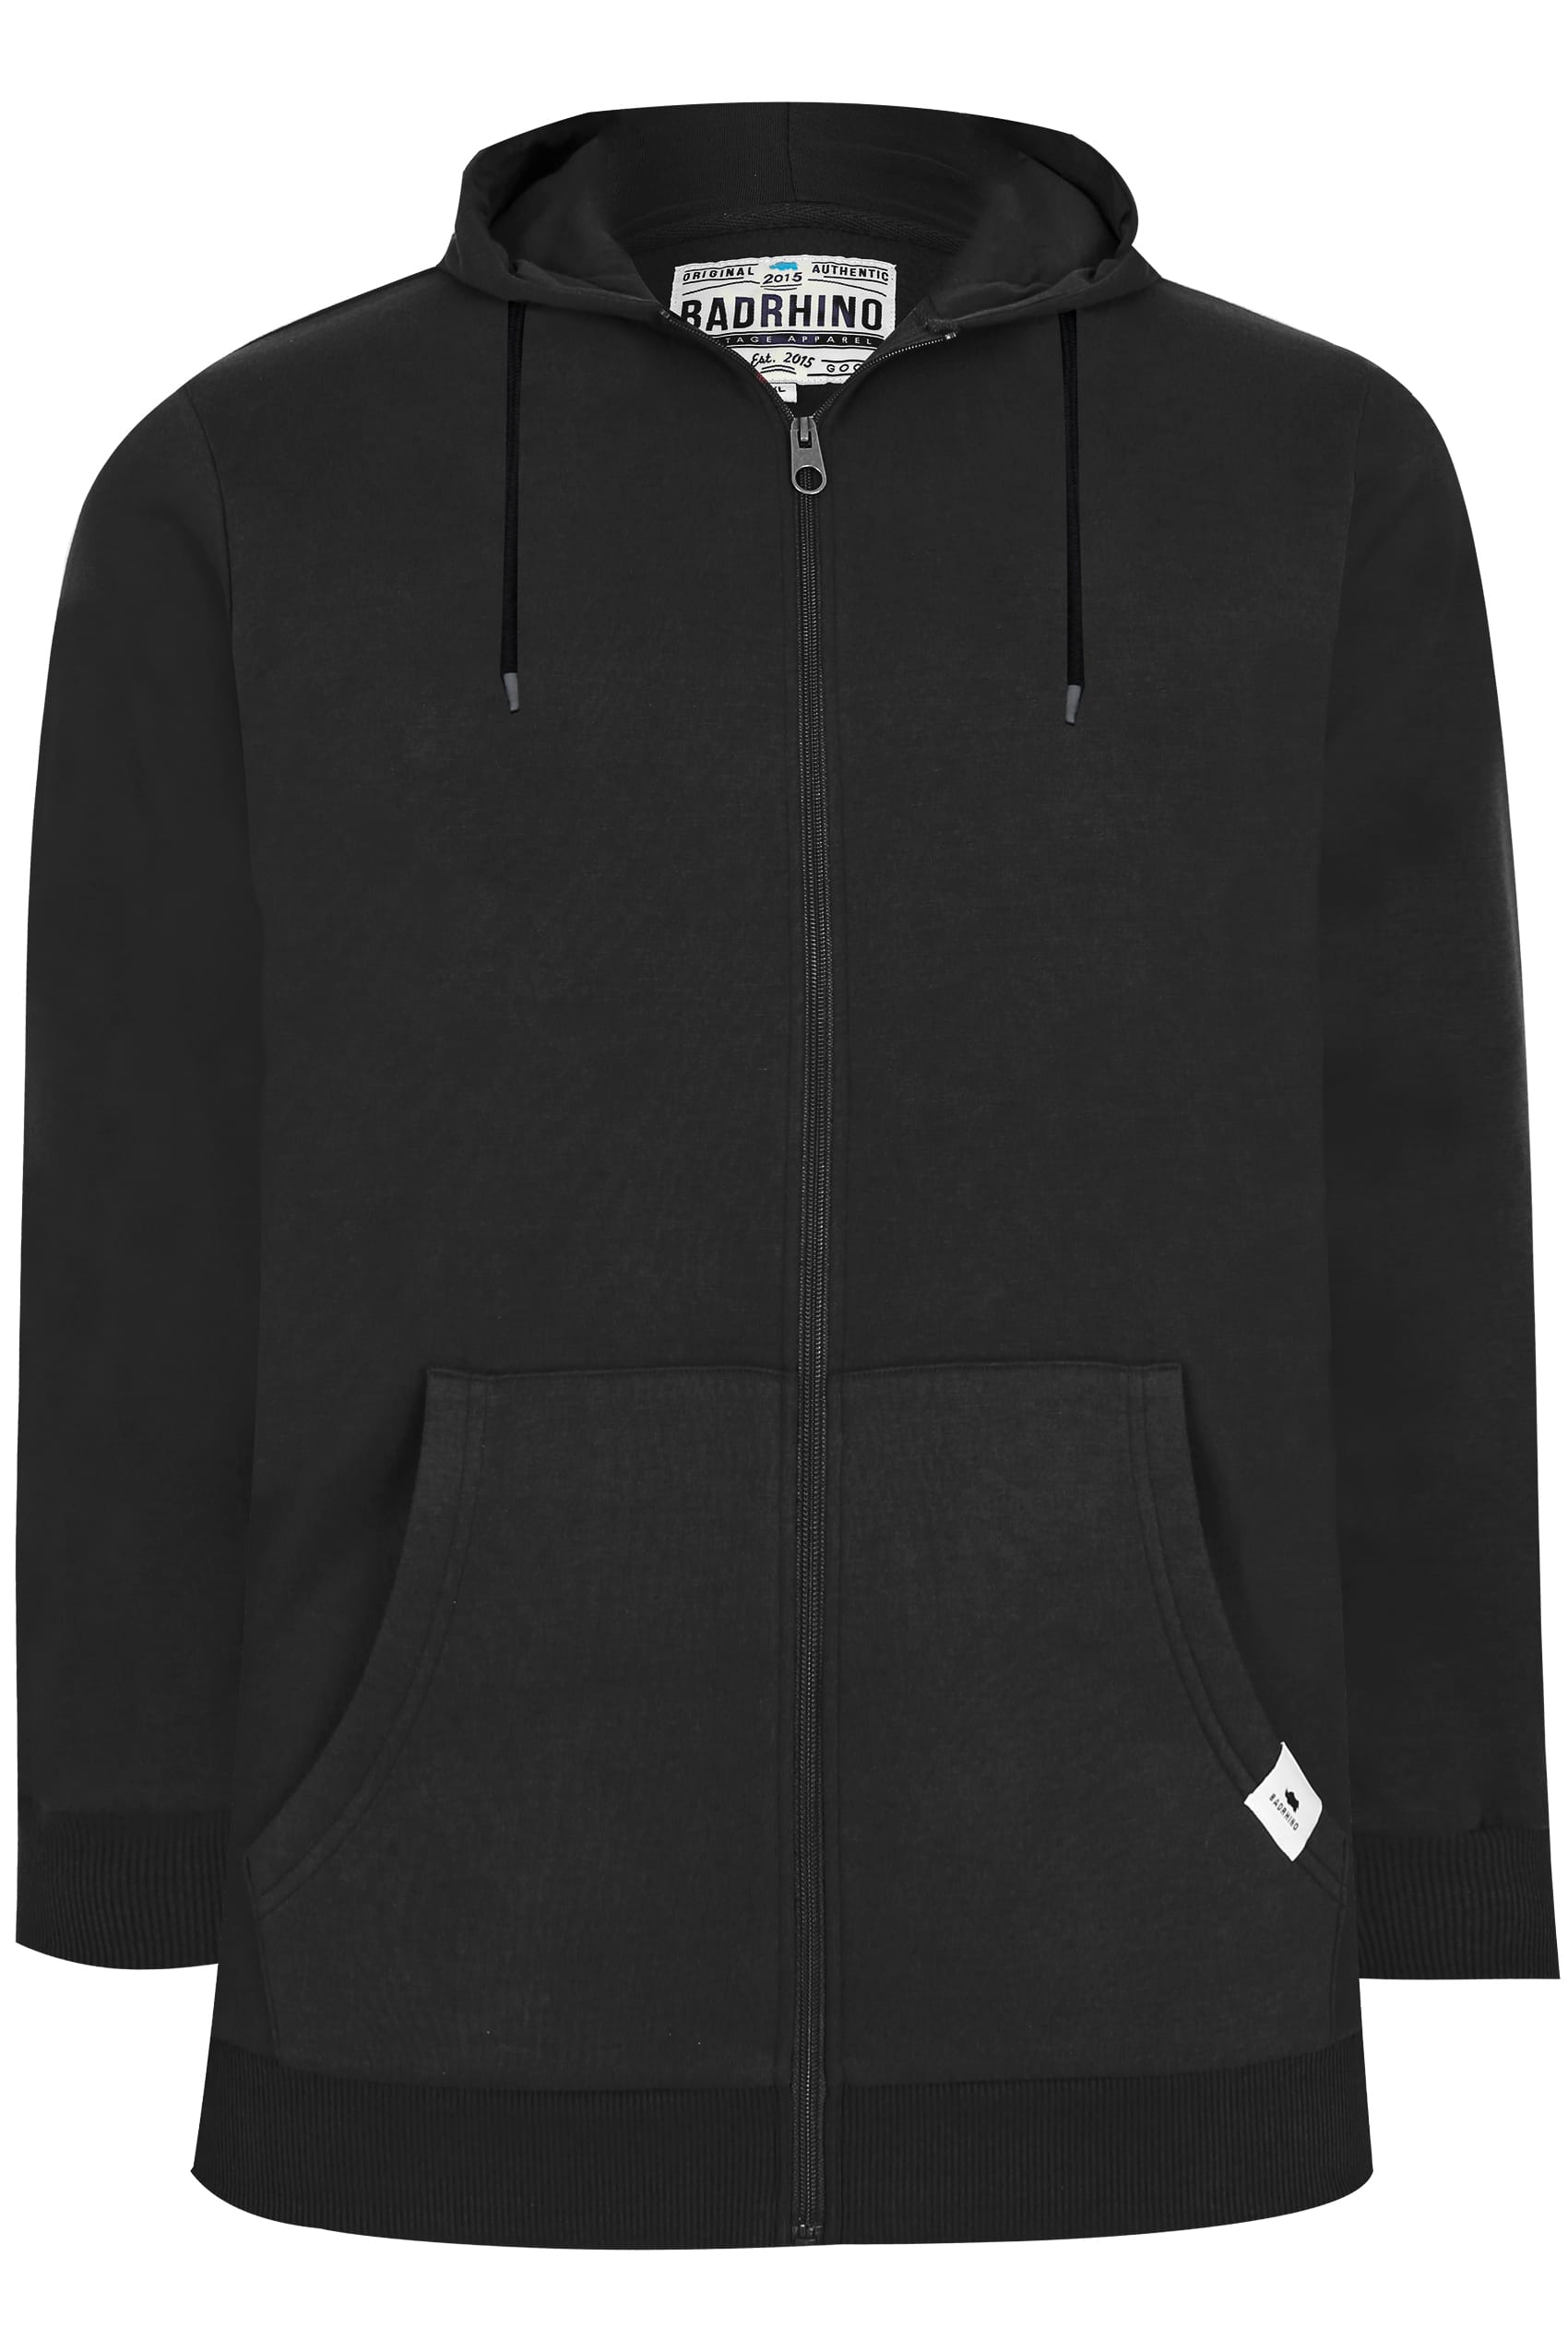 BadRhino Black Basic Sweat Hoodie With Pockets - Extra Large Sizes L to 8XL